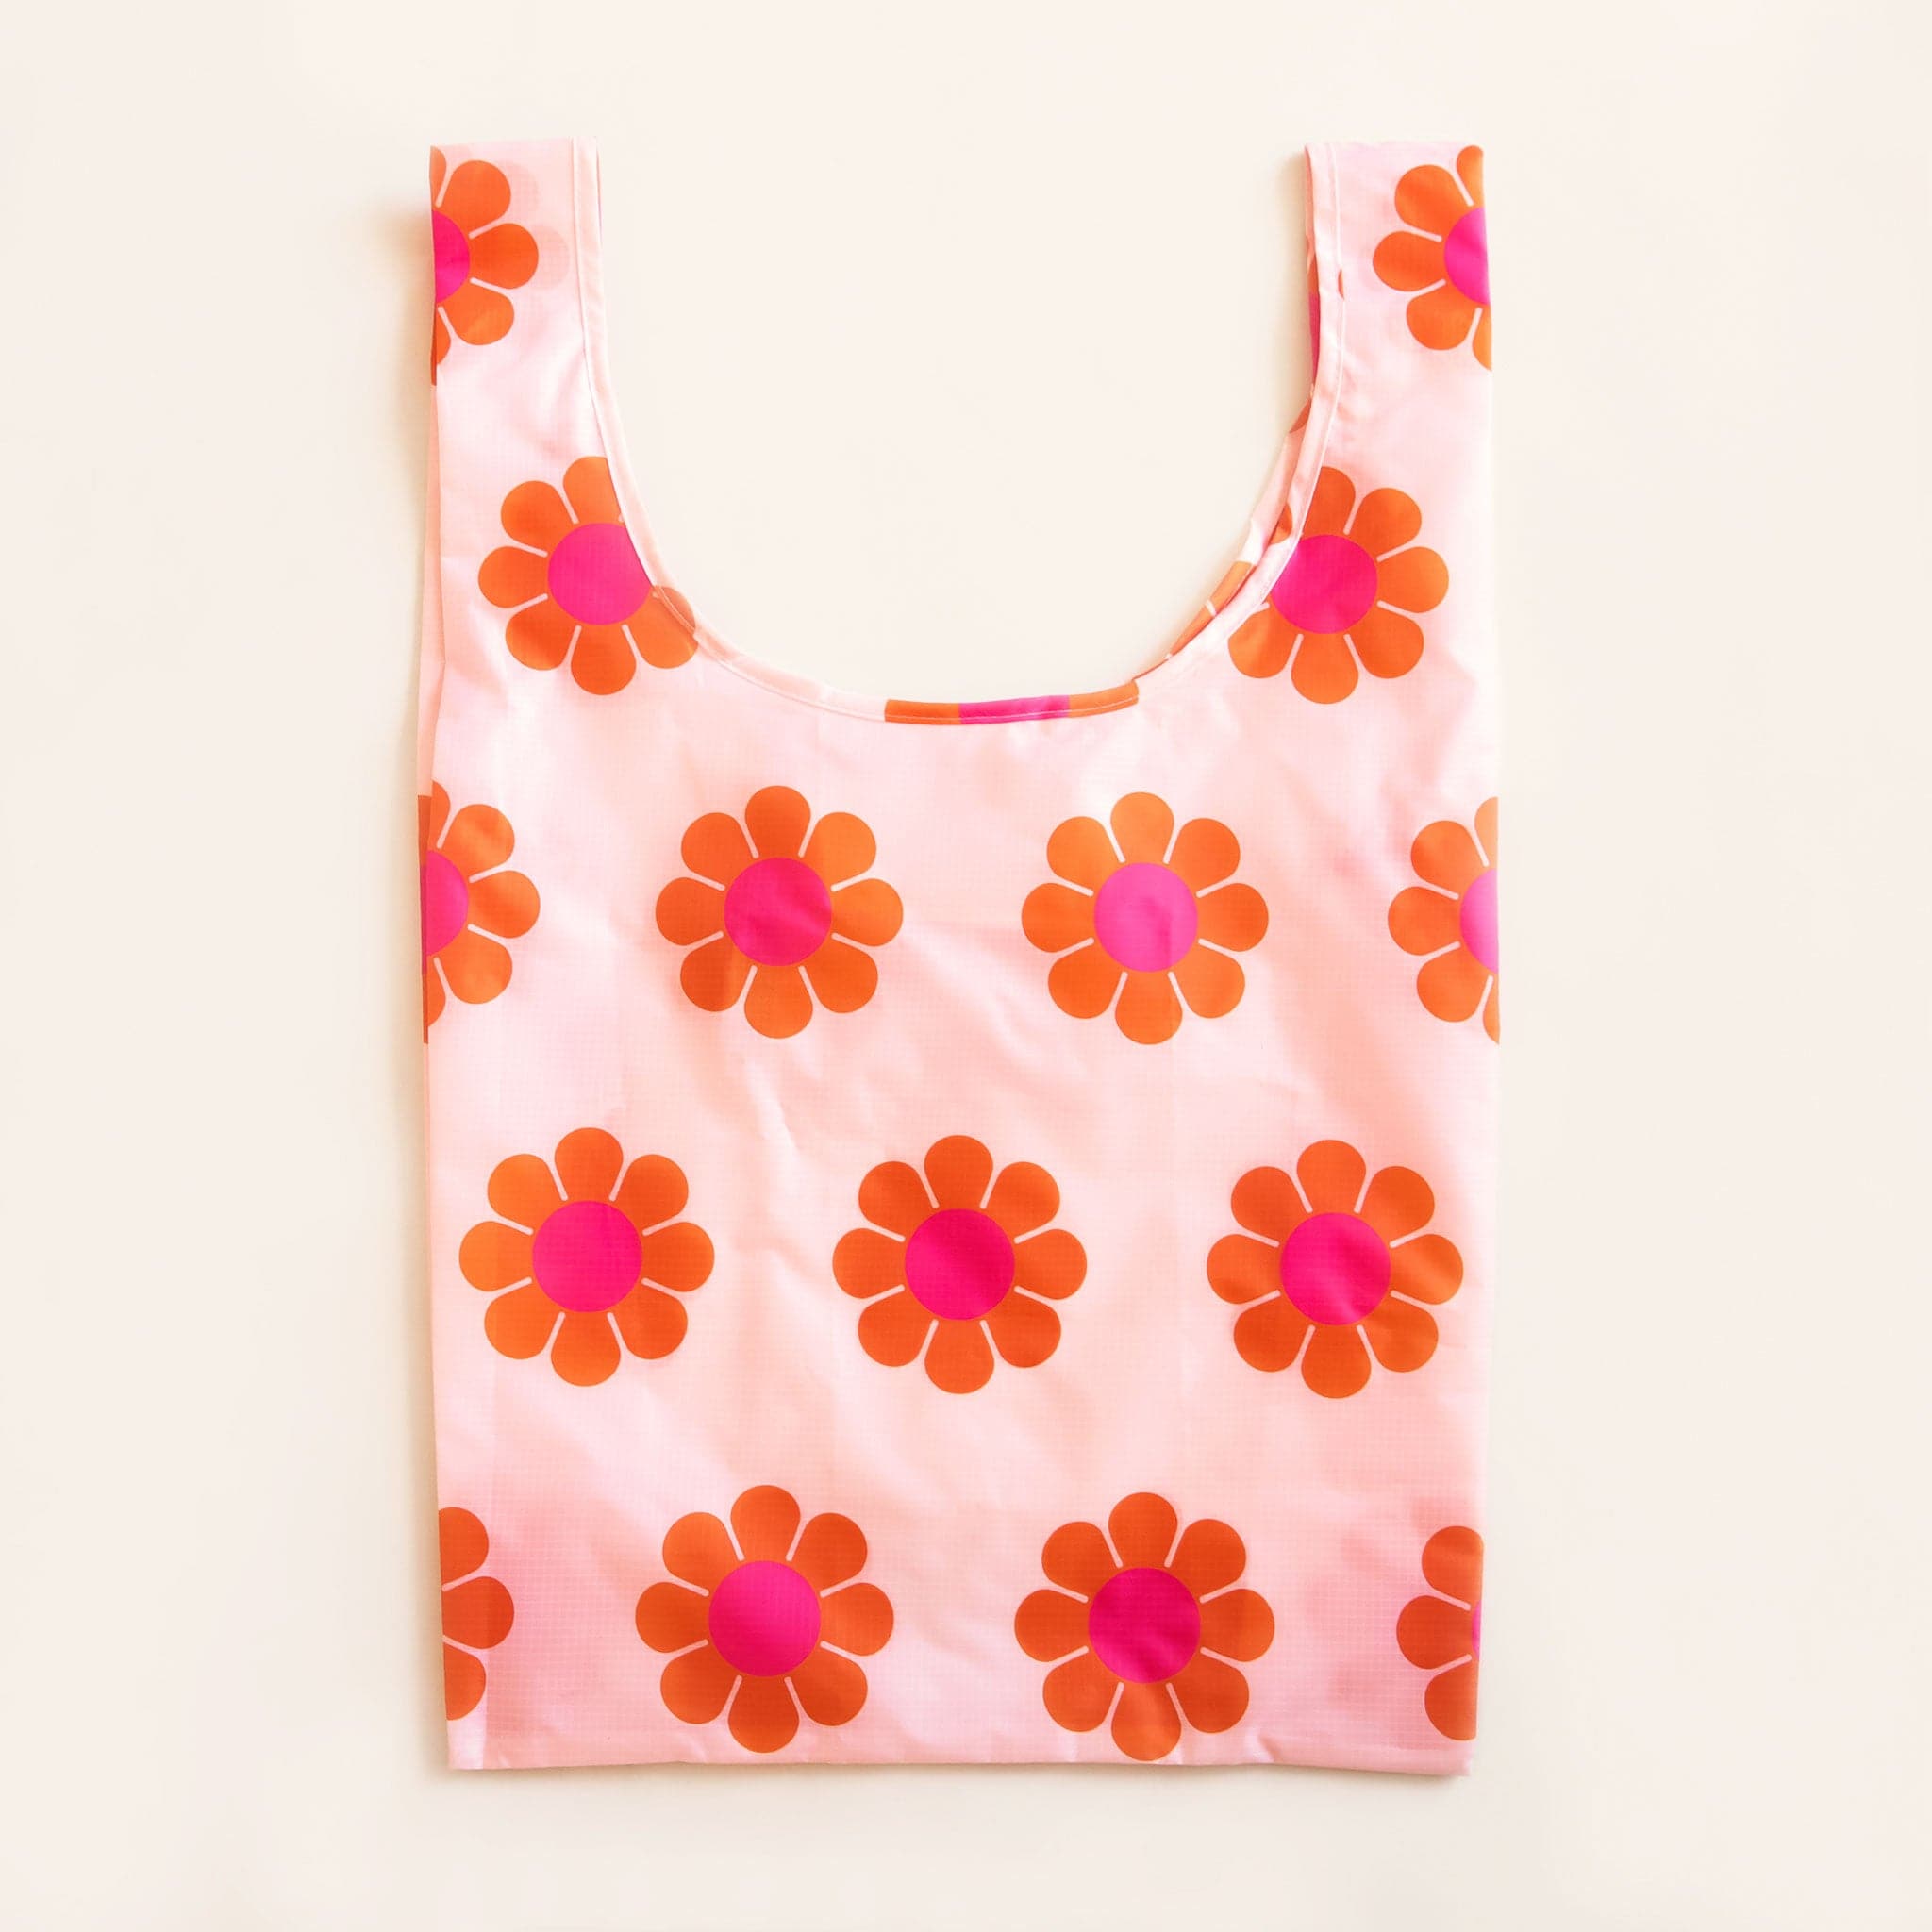 Peach reusable bag covered in a print of simple flowers with red-orange petals and magenta centers. The bag is positioned flat on a table and has a &#39;U&#39; shape between two handles.